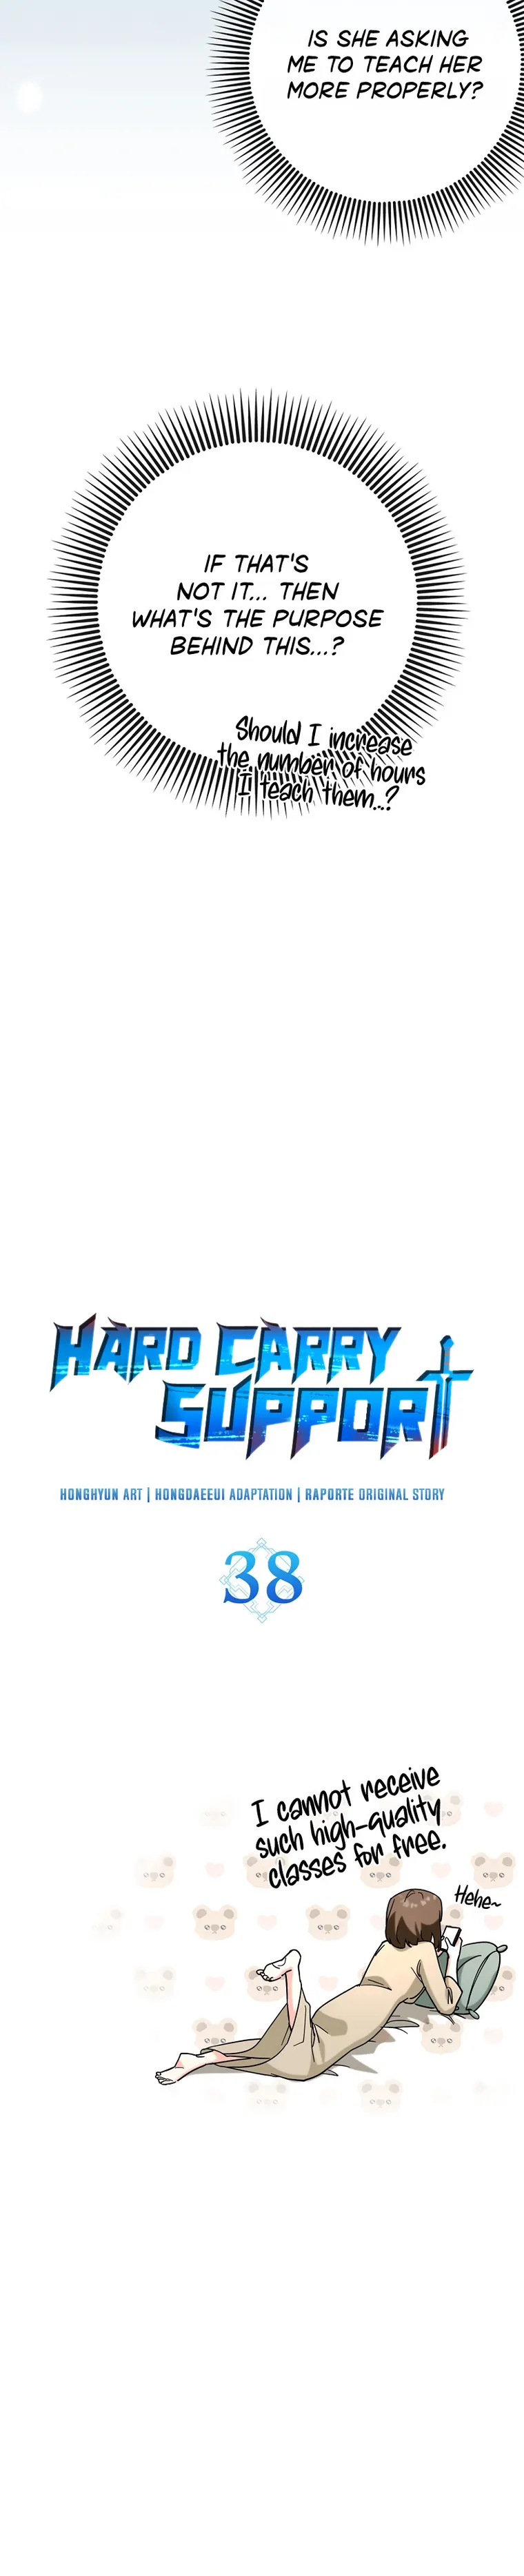 Hard-Carry Support - 38 page 8-3fbfc129